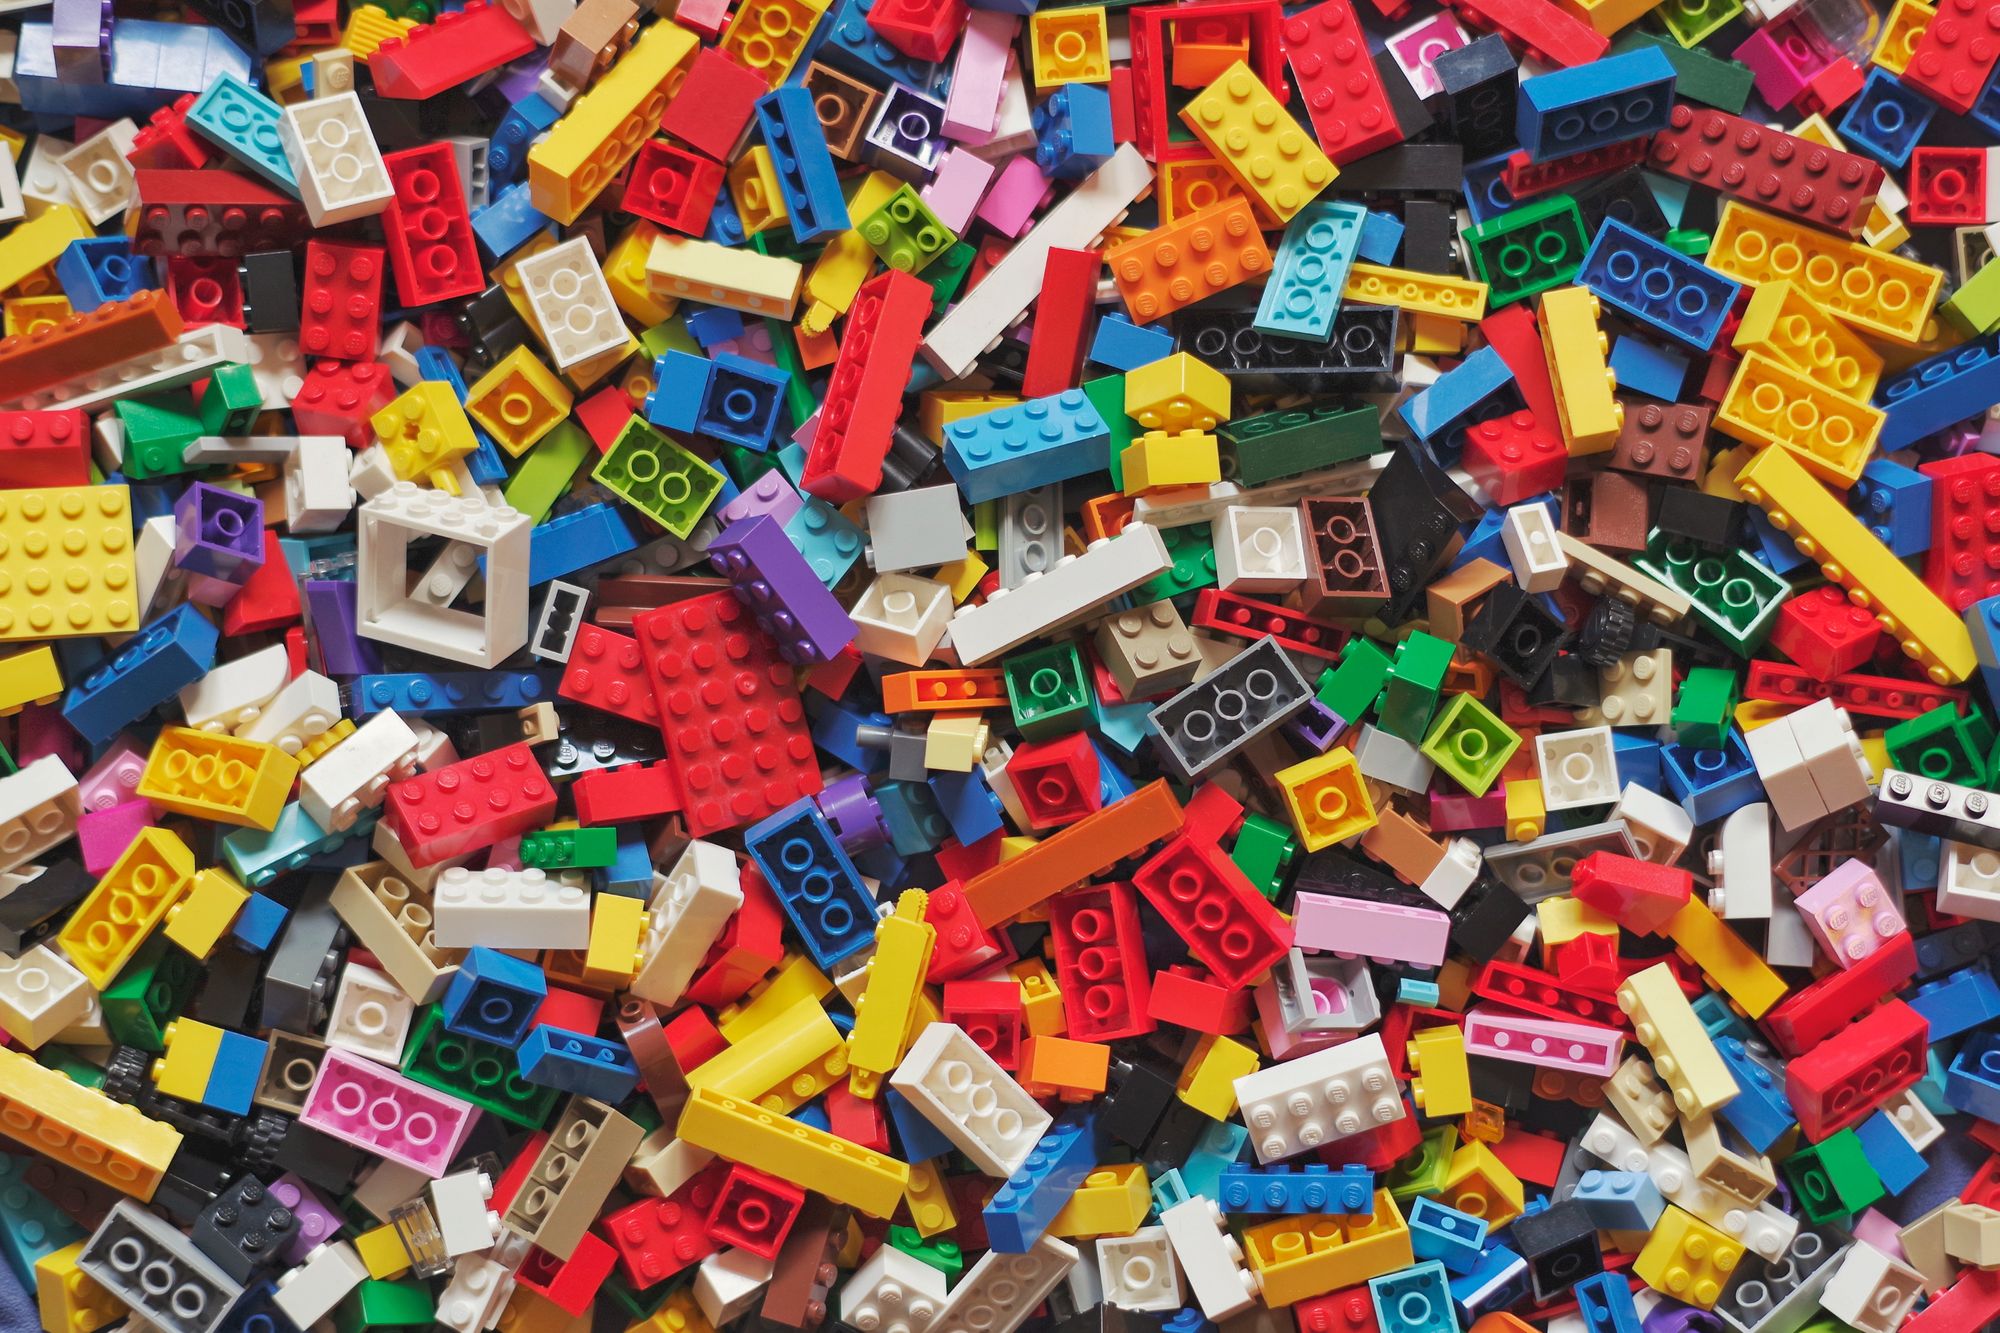 Image of a collection of assorted LEGO pieces